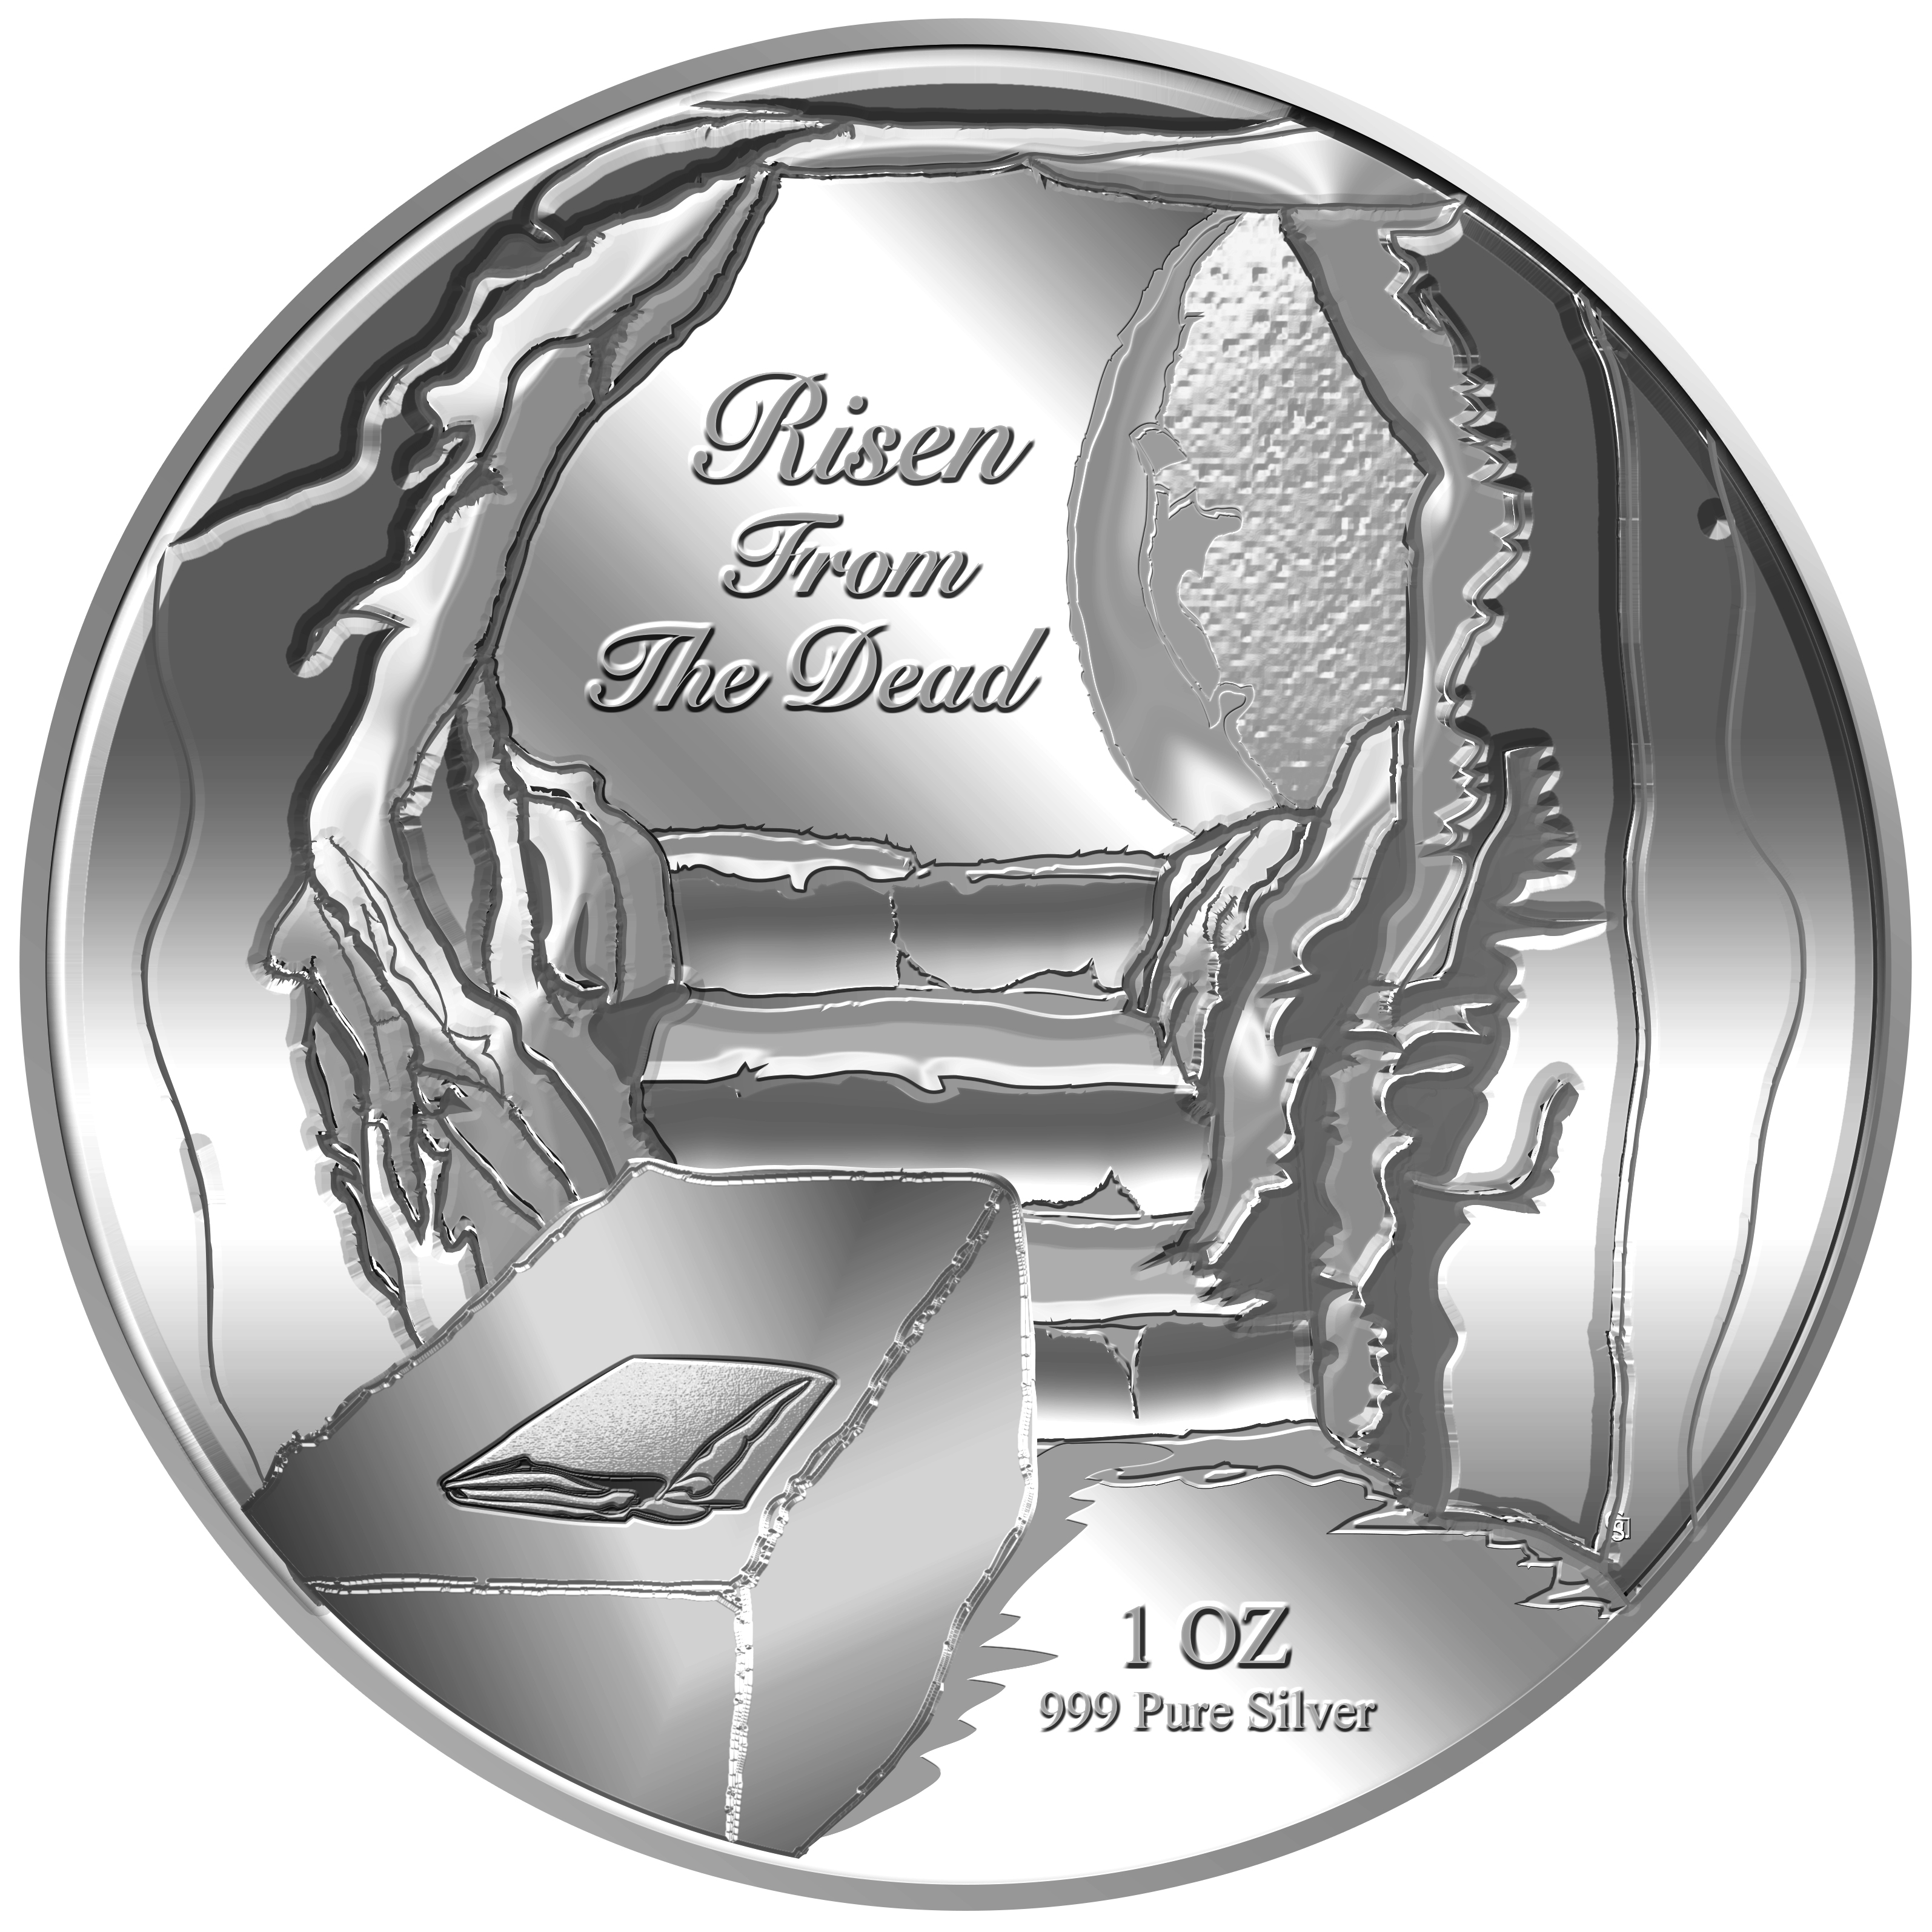 1oz Risen From The Dead Silver Medallion (10TH LAUNCH)